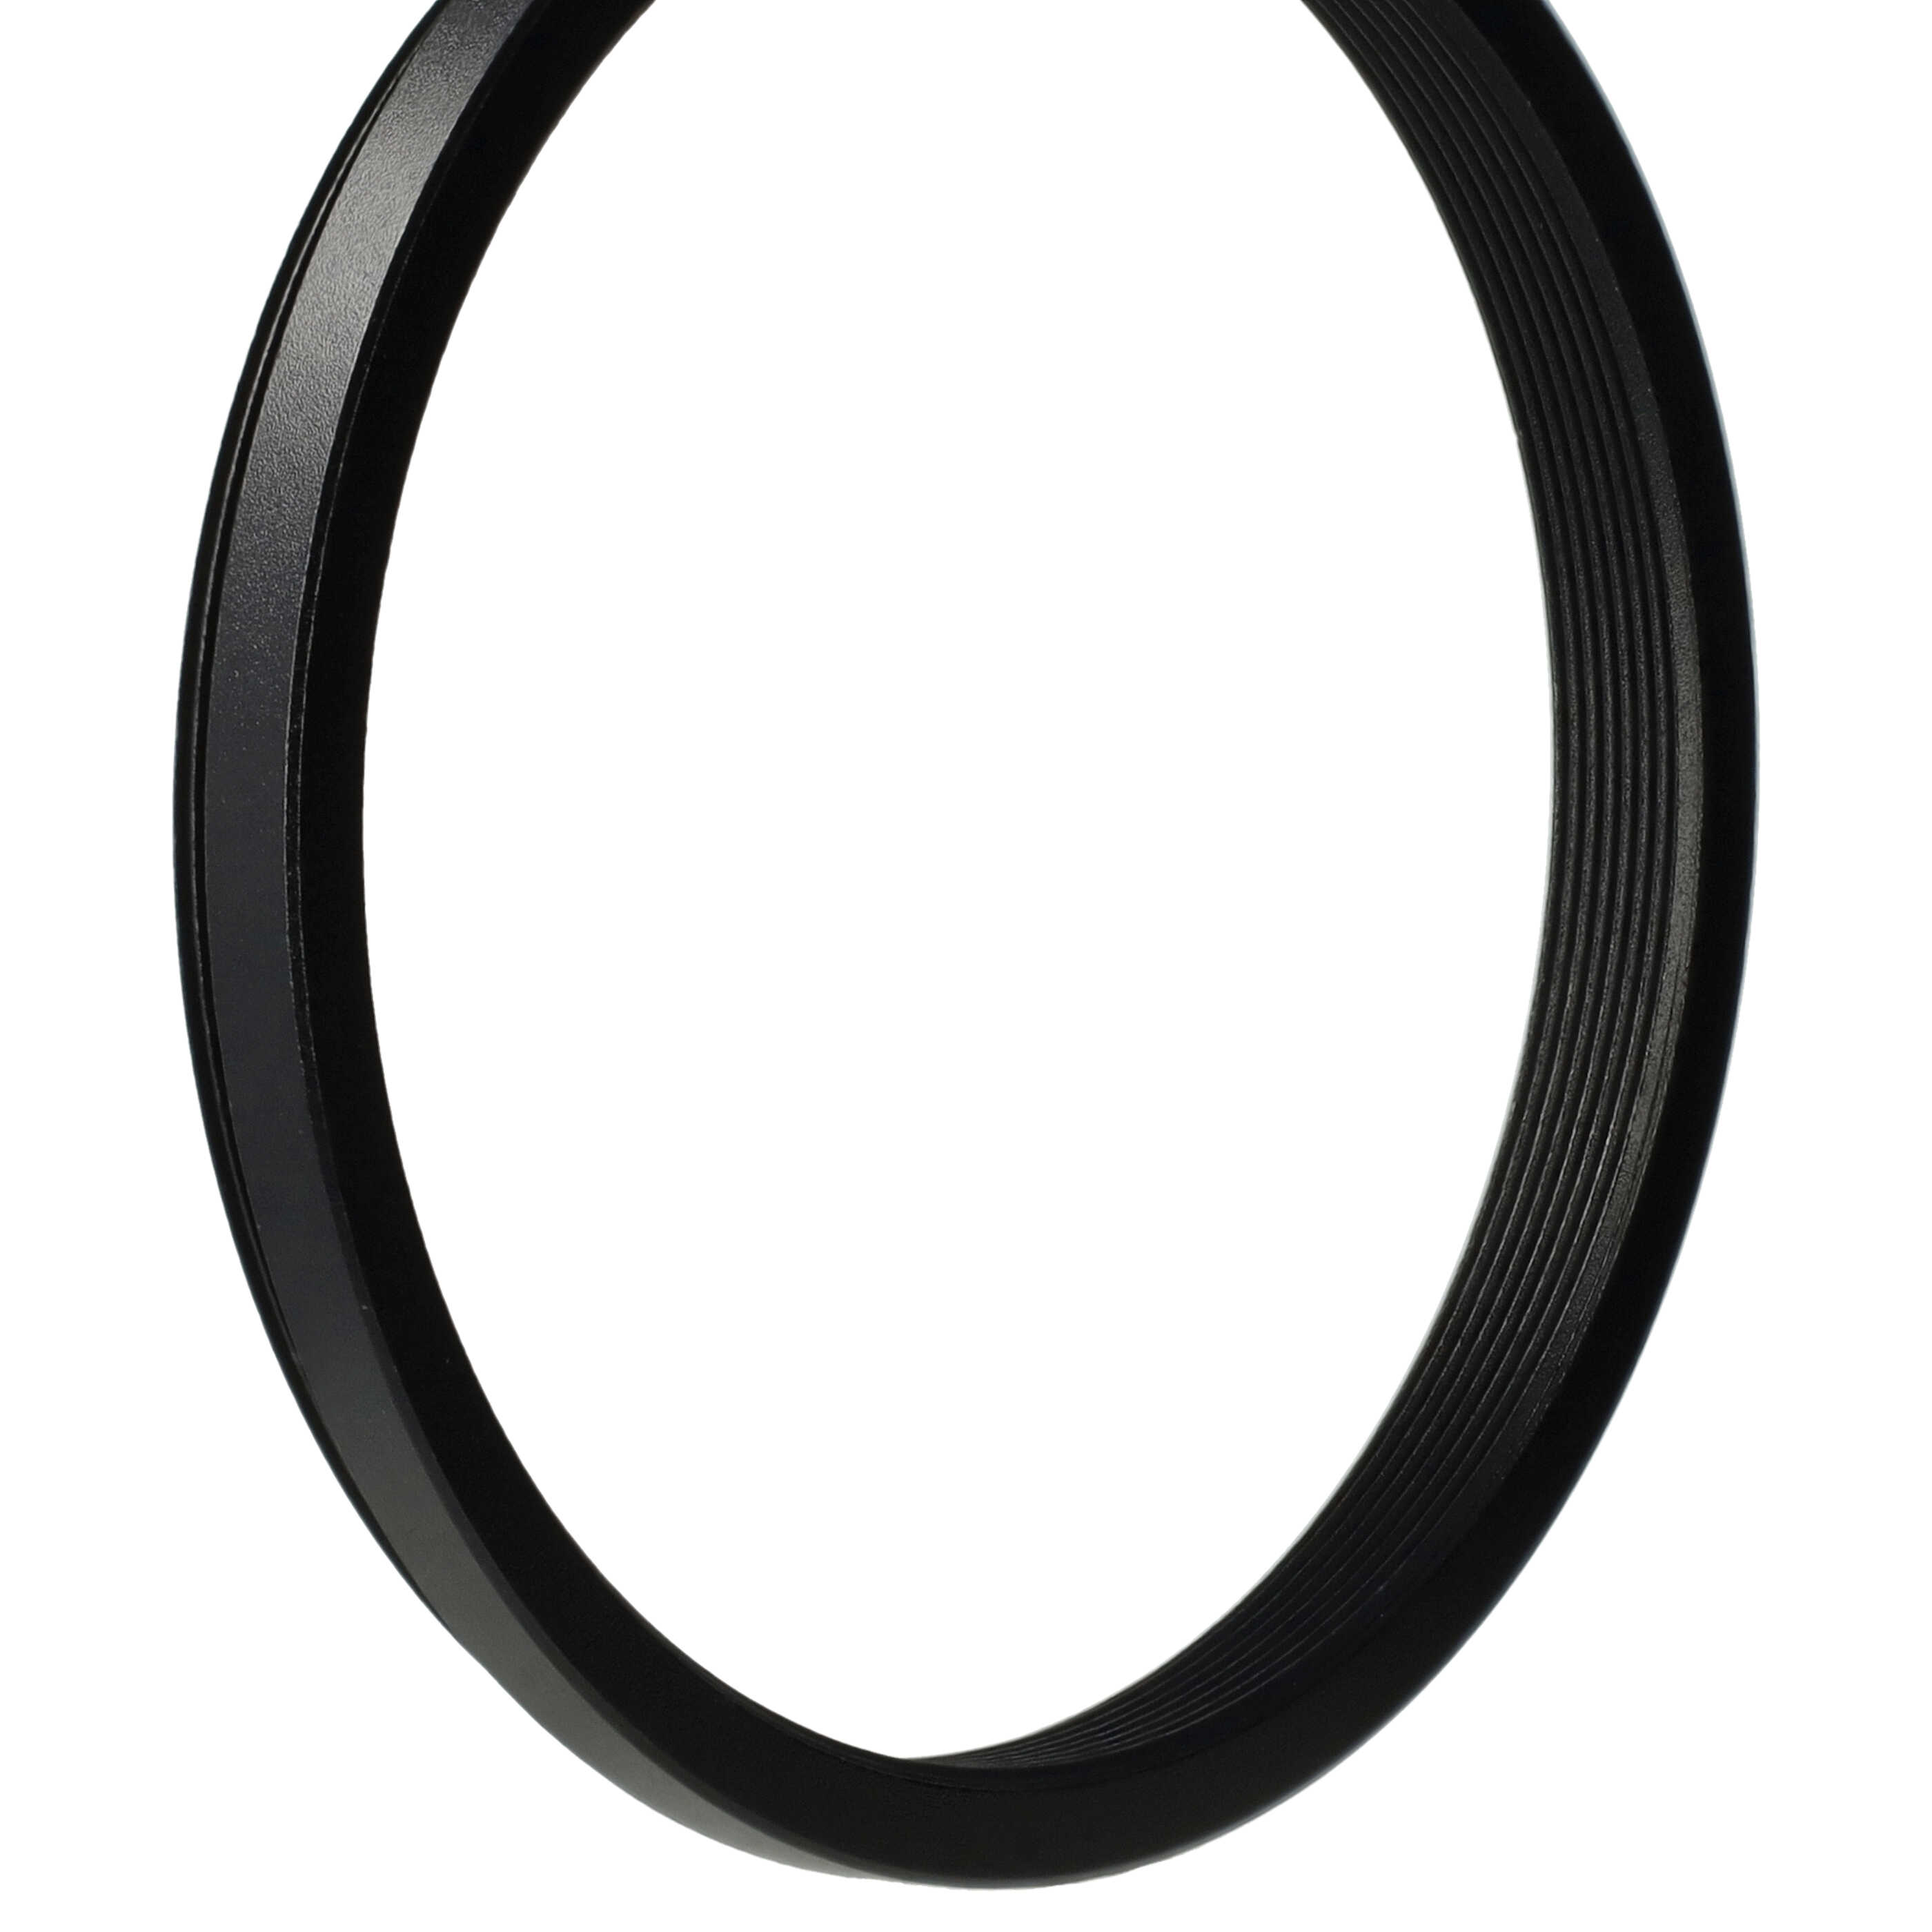 Step-Down Ring Adapter from 62 mm to 58 mm suitable for Camera Lens - Filter Adapter, metal